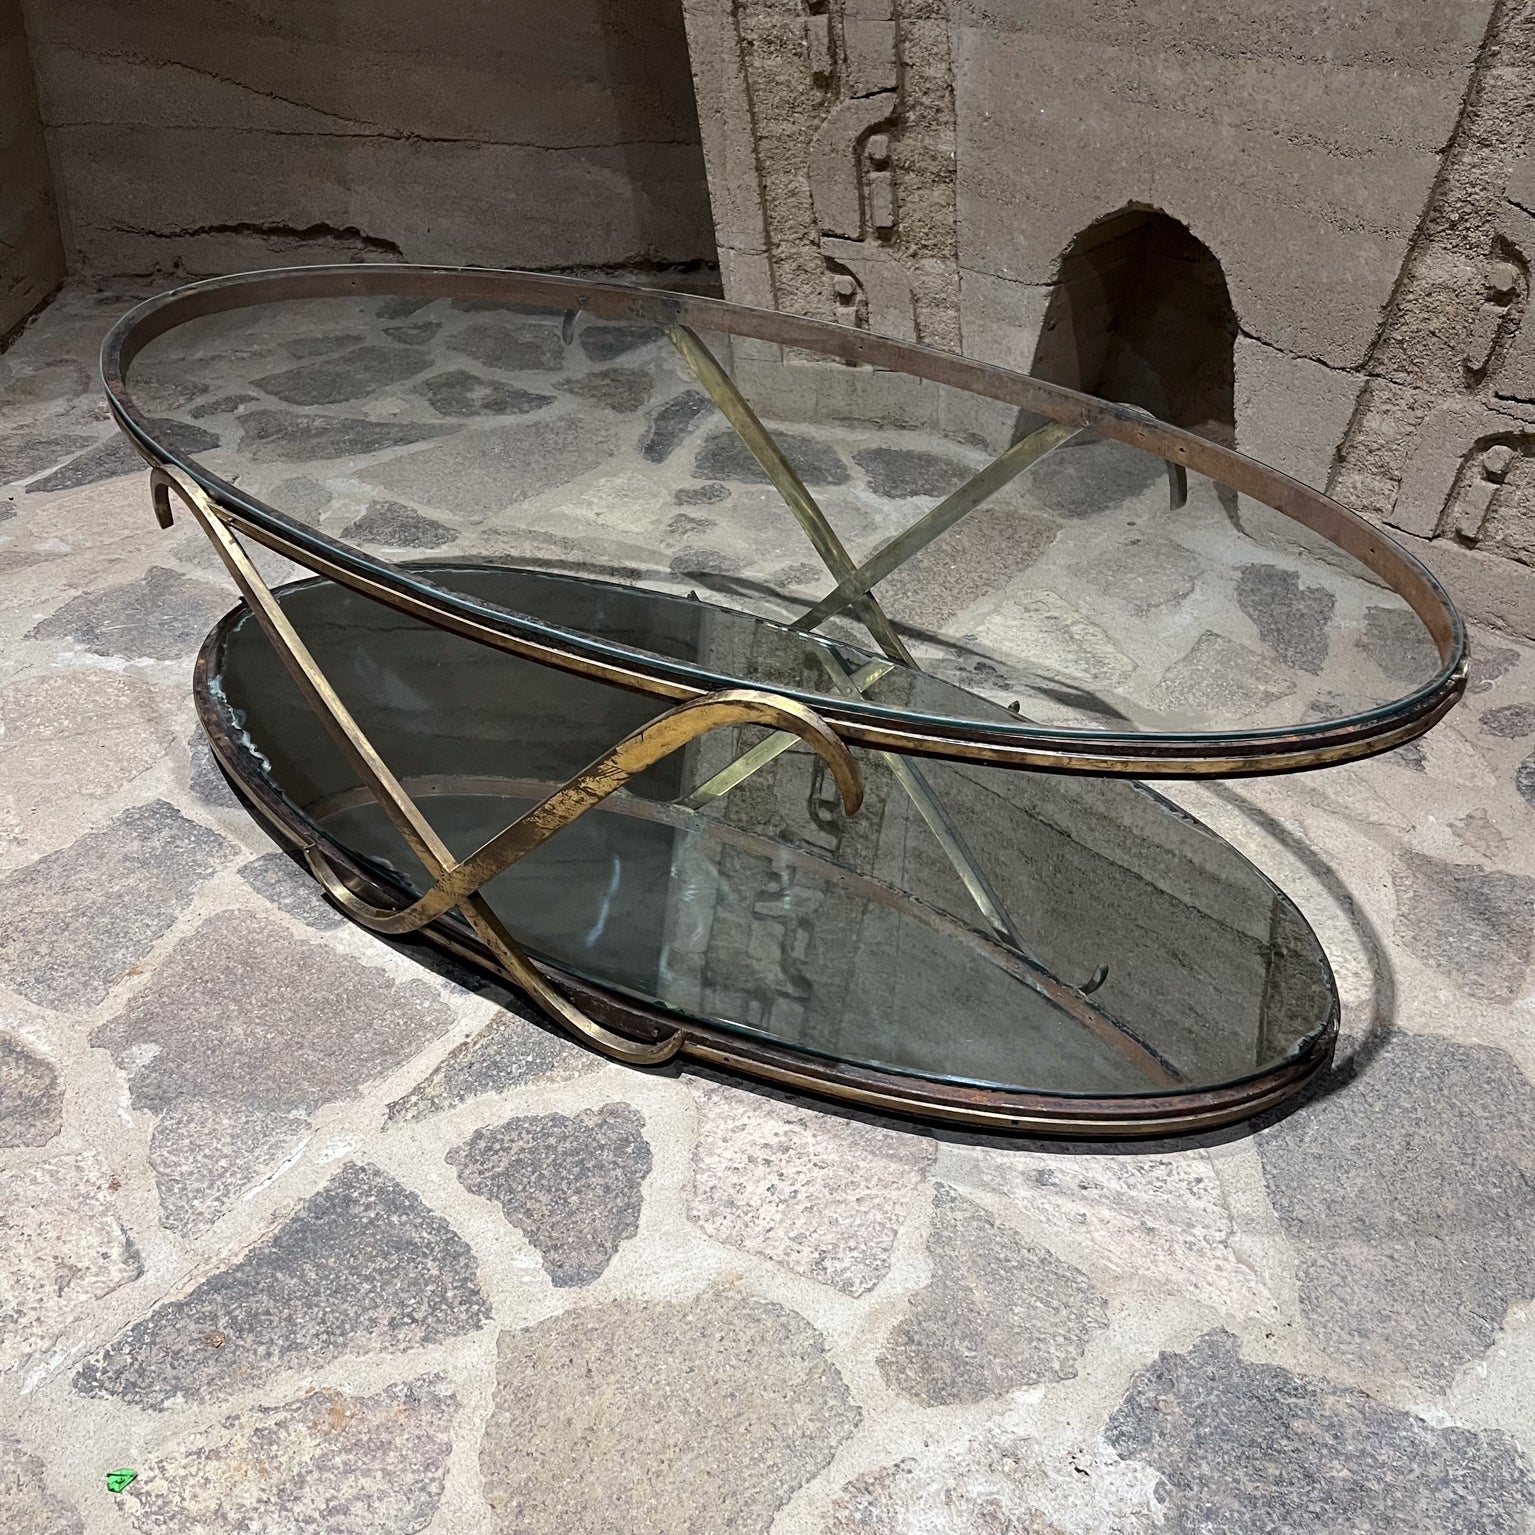 Sculptural Tiered Coffee Table Mexico circa 1950s
Iron frame with Brass X oval mirrored Glass
Unmarked attribution Arturo Pani 
16 h x 51.13 long x 24.5 w
Original preowned vintage condition.
Original patina. Scuffs present.
Bottom mirror original